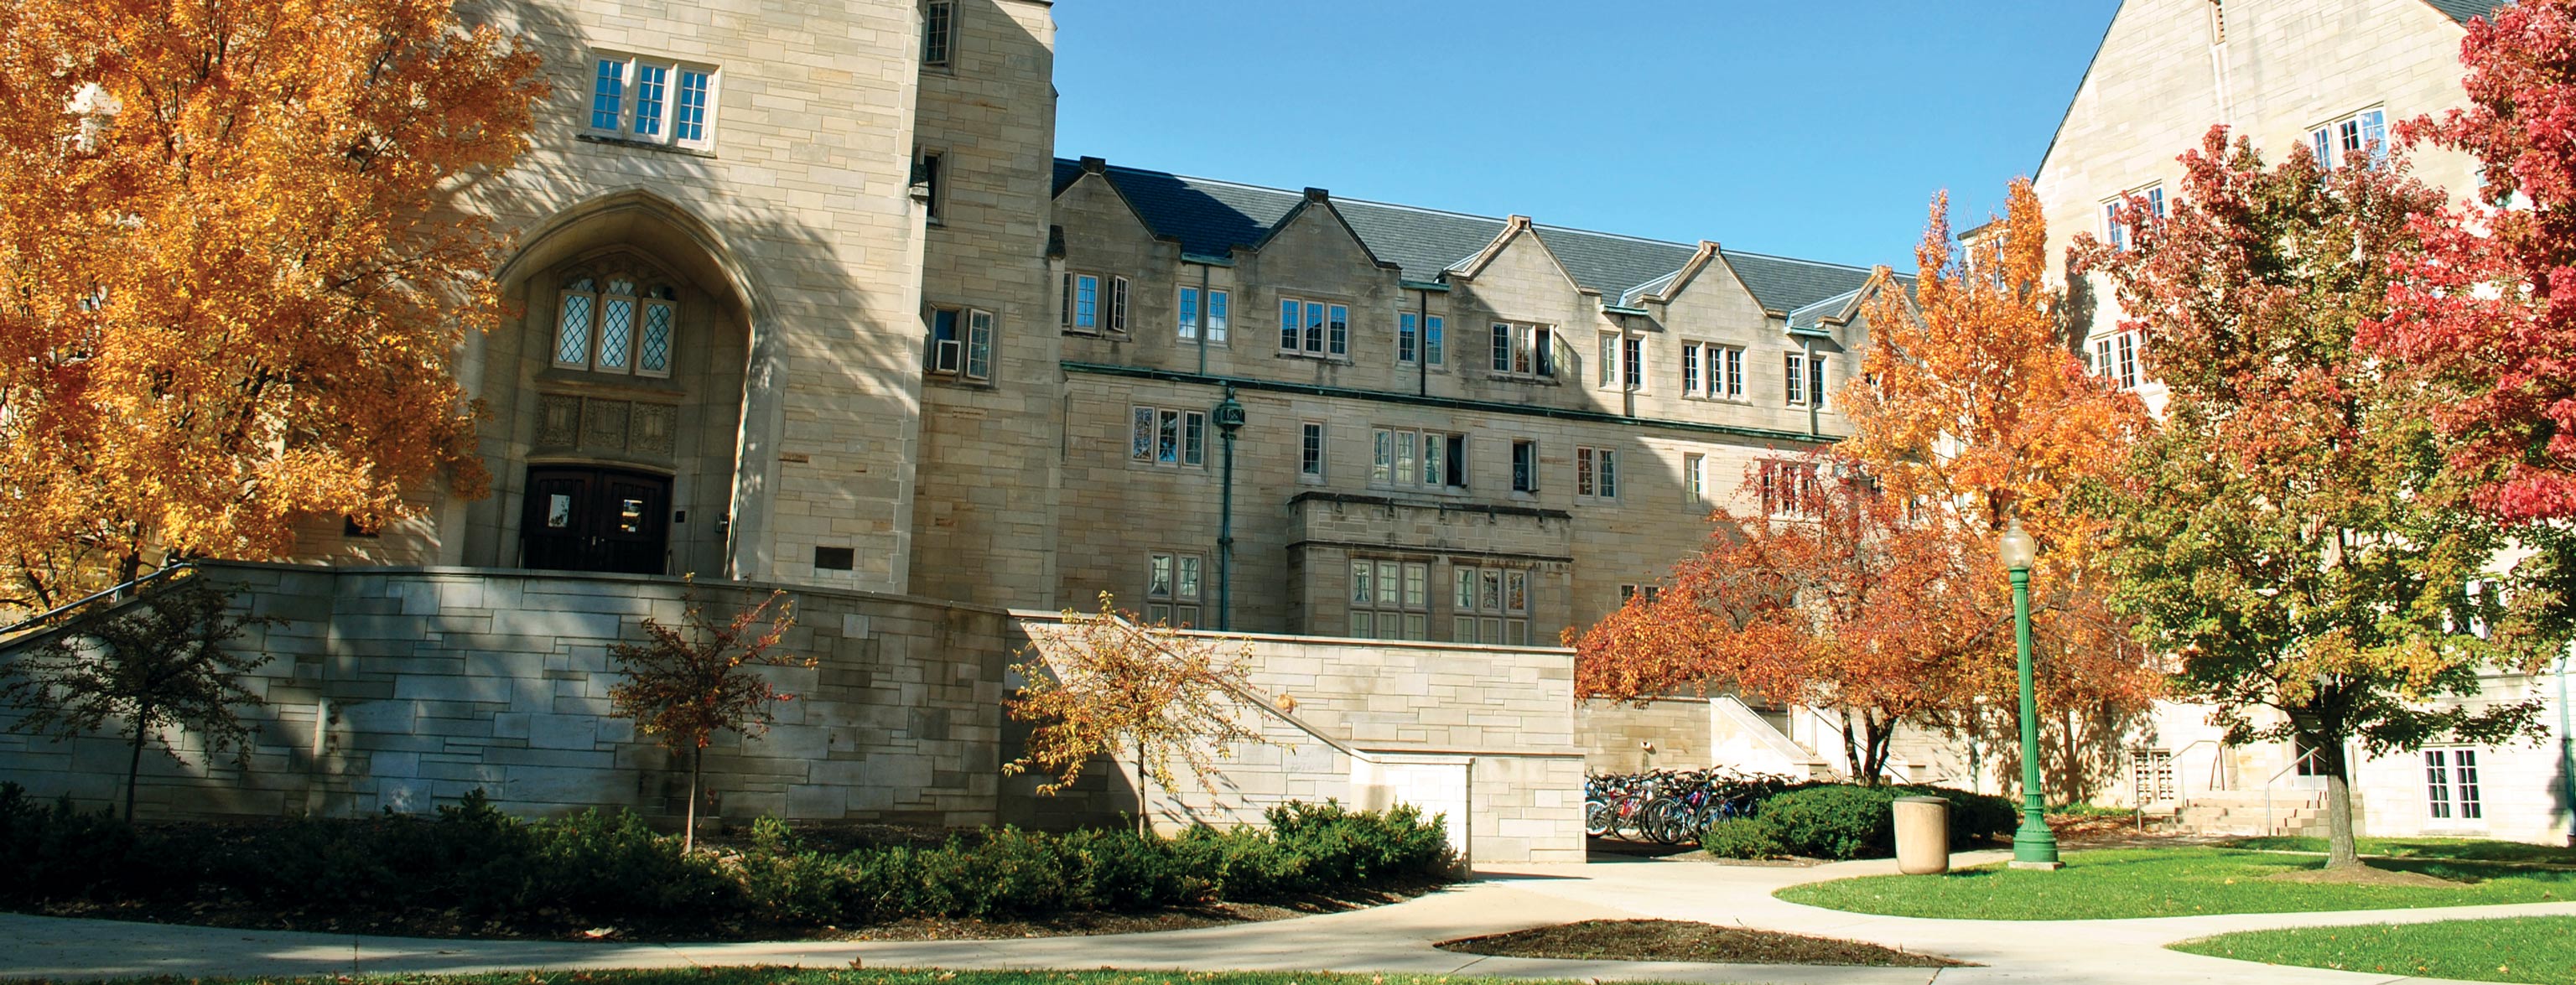 The exterior of Collins Living-Learning Center in the fall when the leaves on its courtyard trees are red. orange, and green